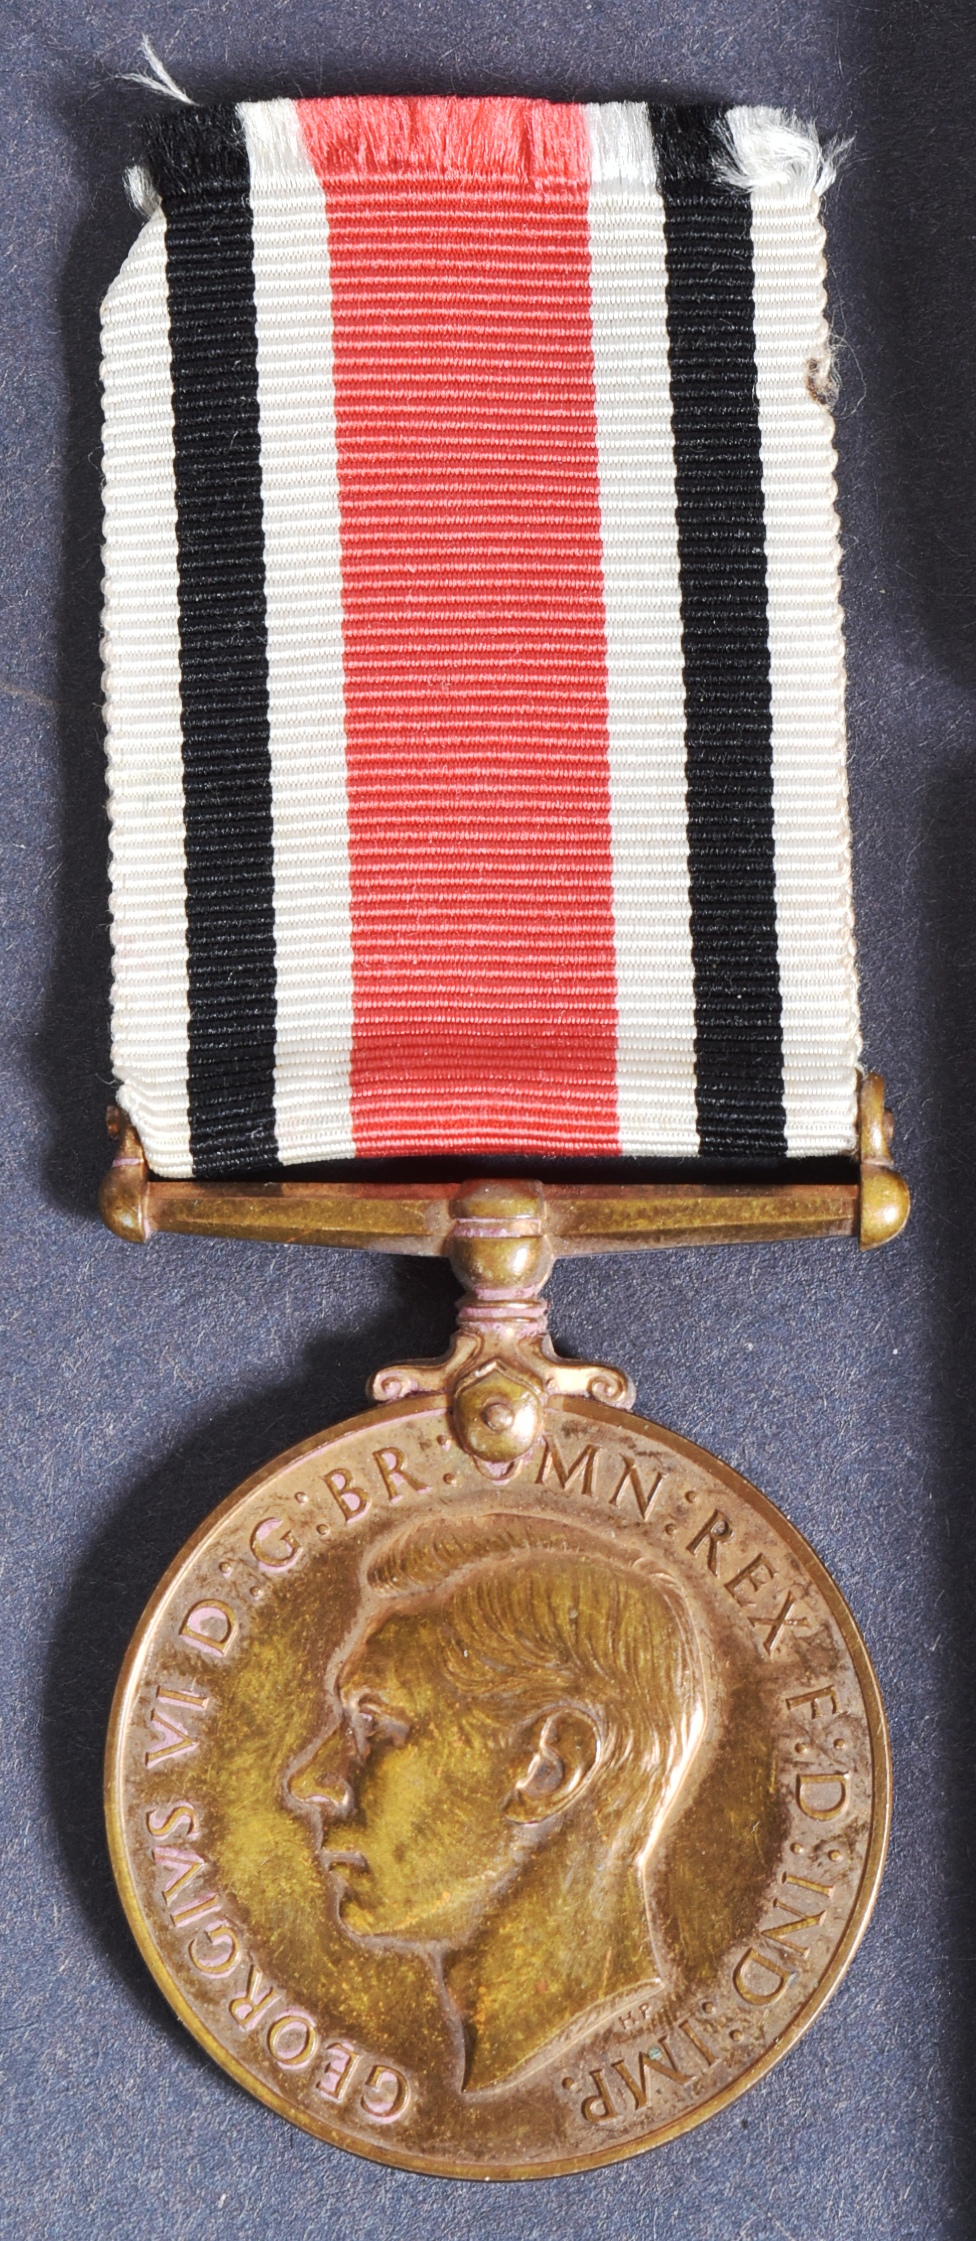 MEDALS - GEORGE VI SPECIAL CONSTABULARY MEDAL & OTHERS - Image 2 of 5